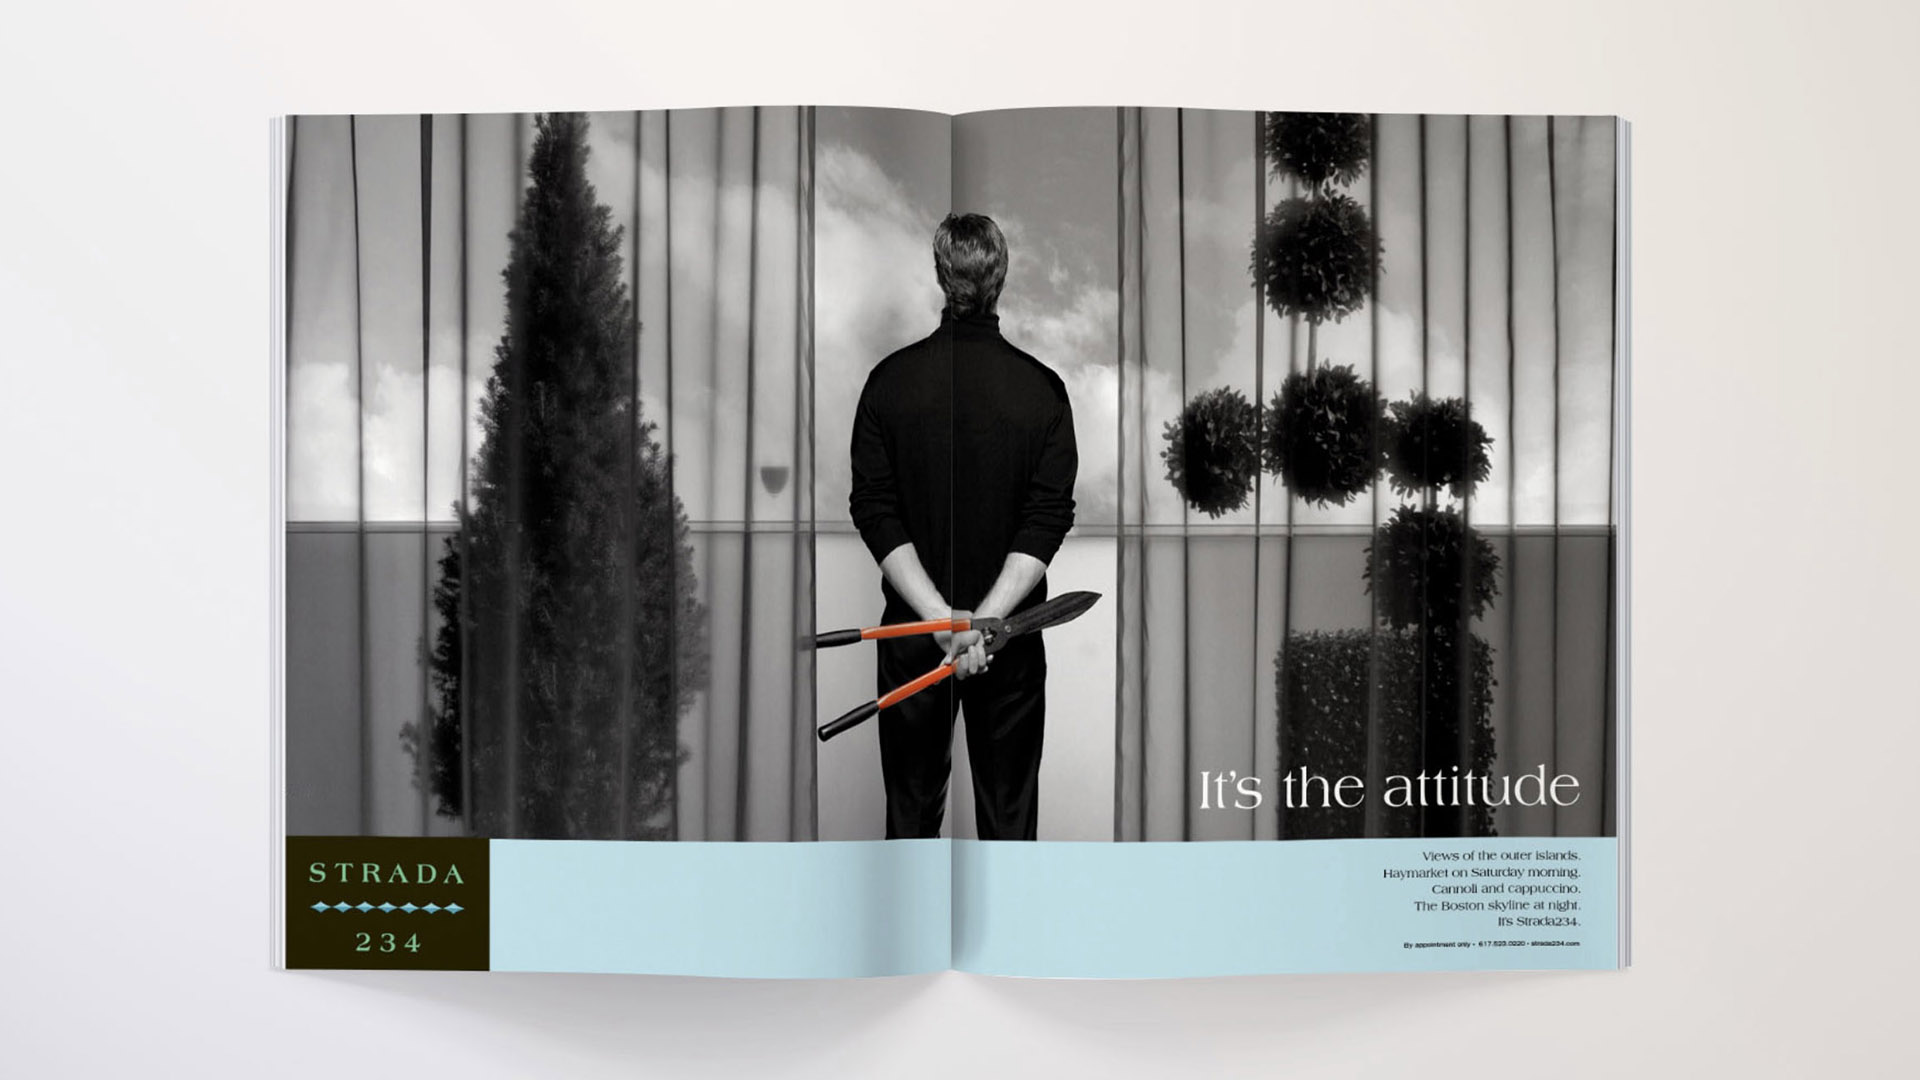 strada234 advertising with man with orange sheers and topiaries on magazine spread by best boston graphic design studio